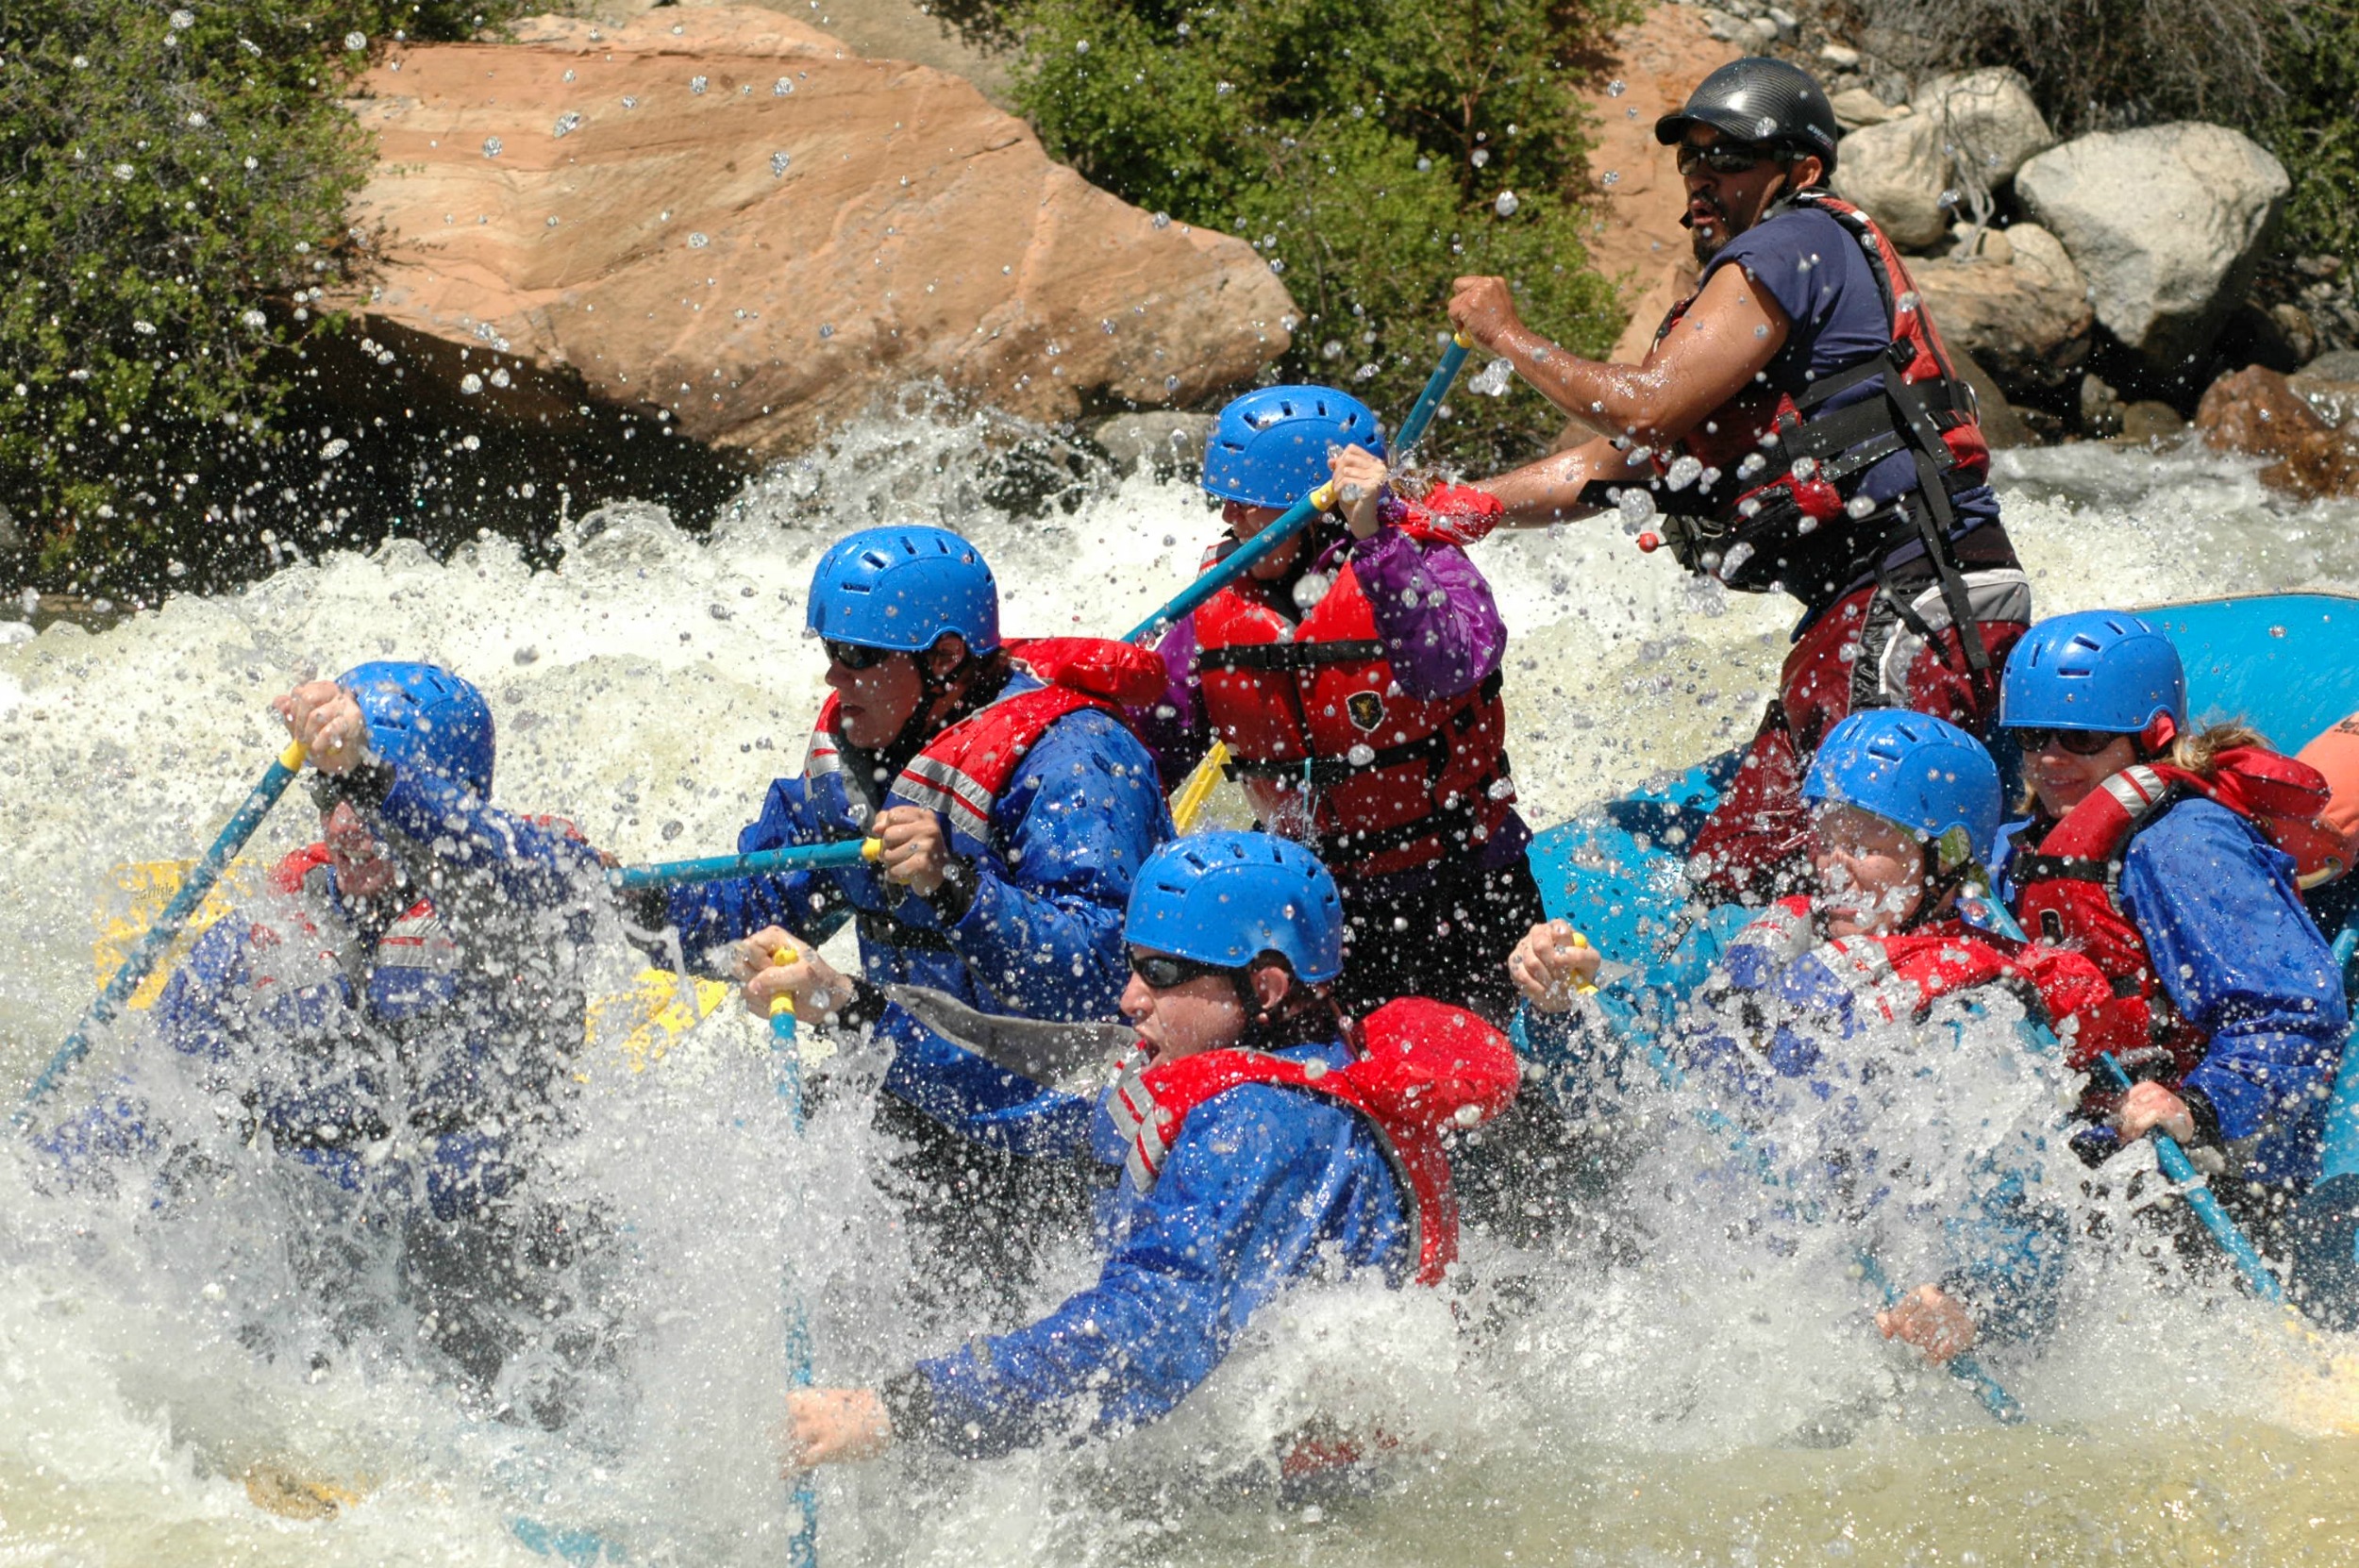 Whitewater Rafting, the real adventure